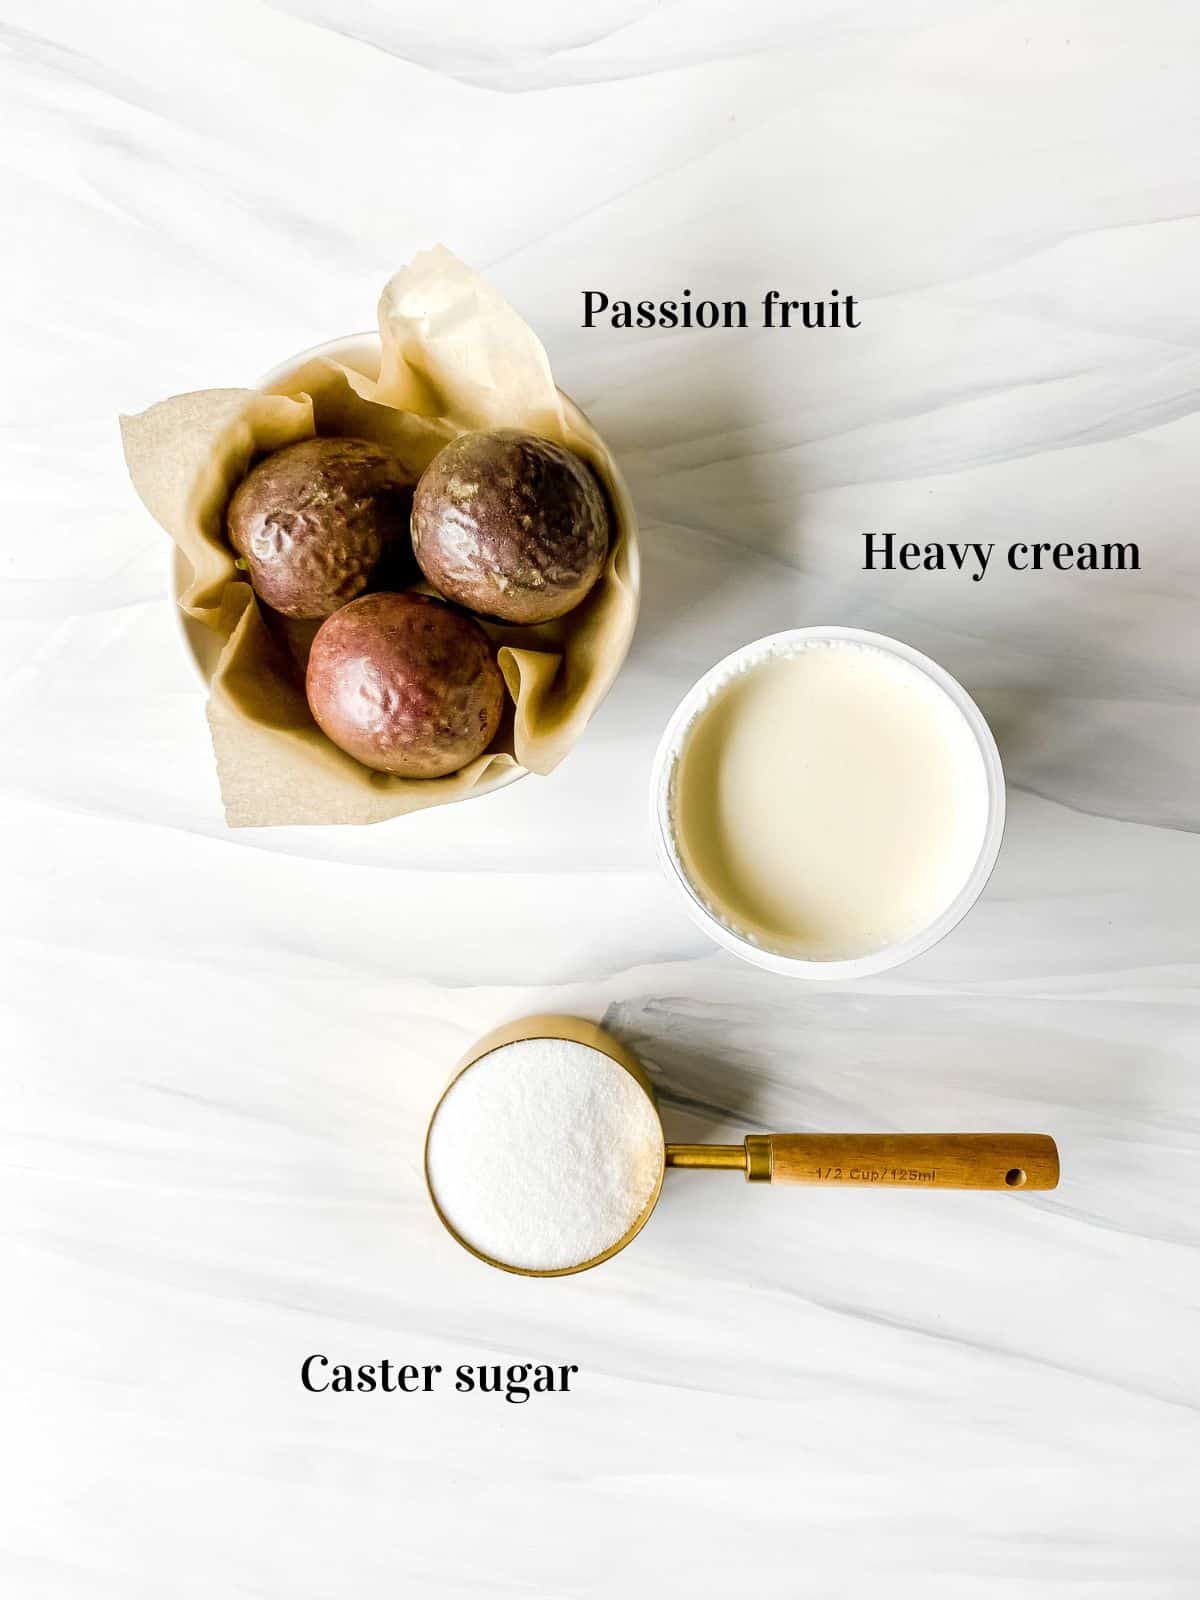 labelled bowl of passion fruit, carton of heavy cream and cup of white sugar.